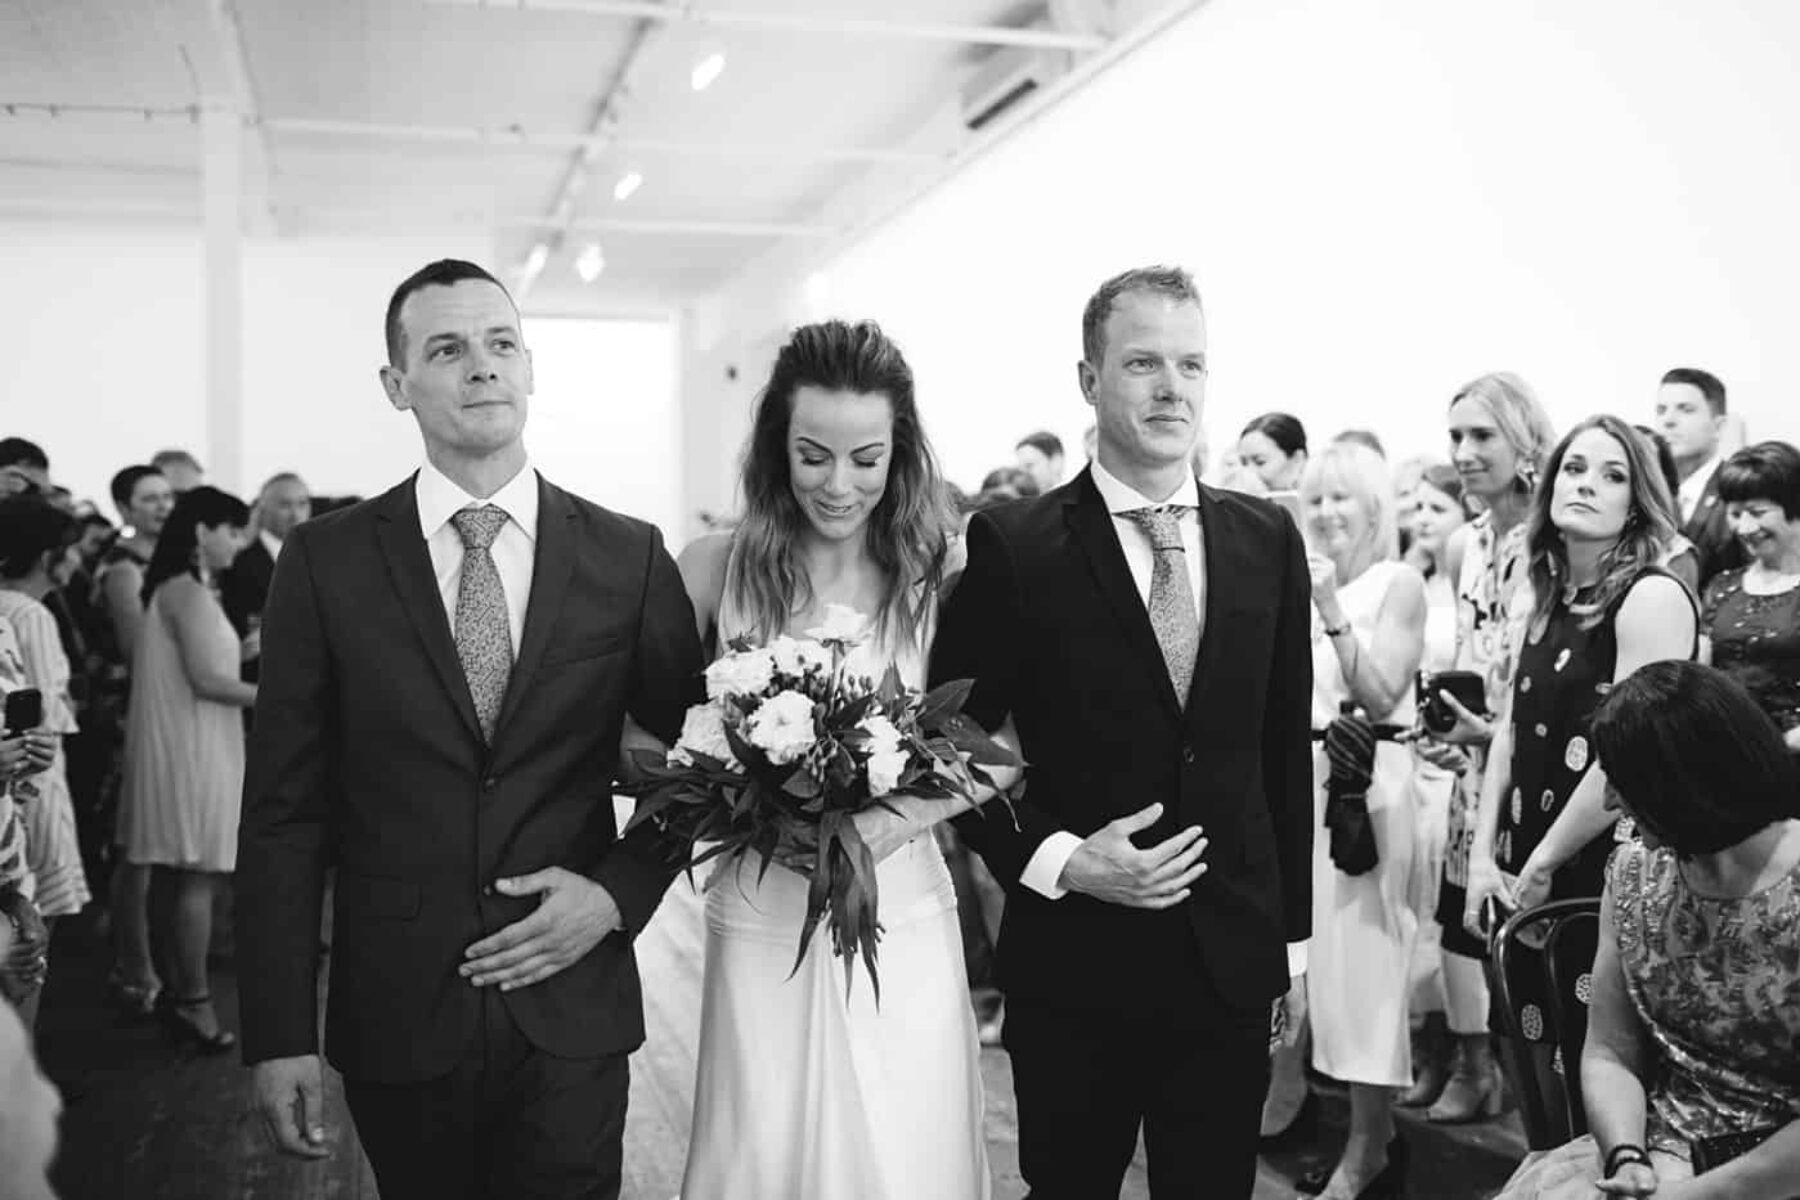 Melbourne warehouse wedding at Fortyfive Downstairs / Photography by It's Beautiful Here